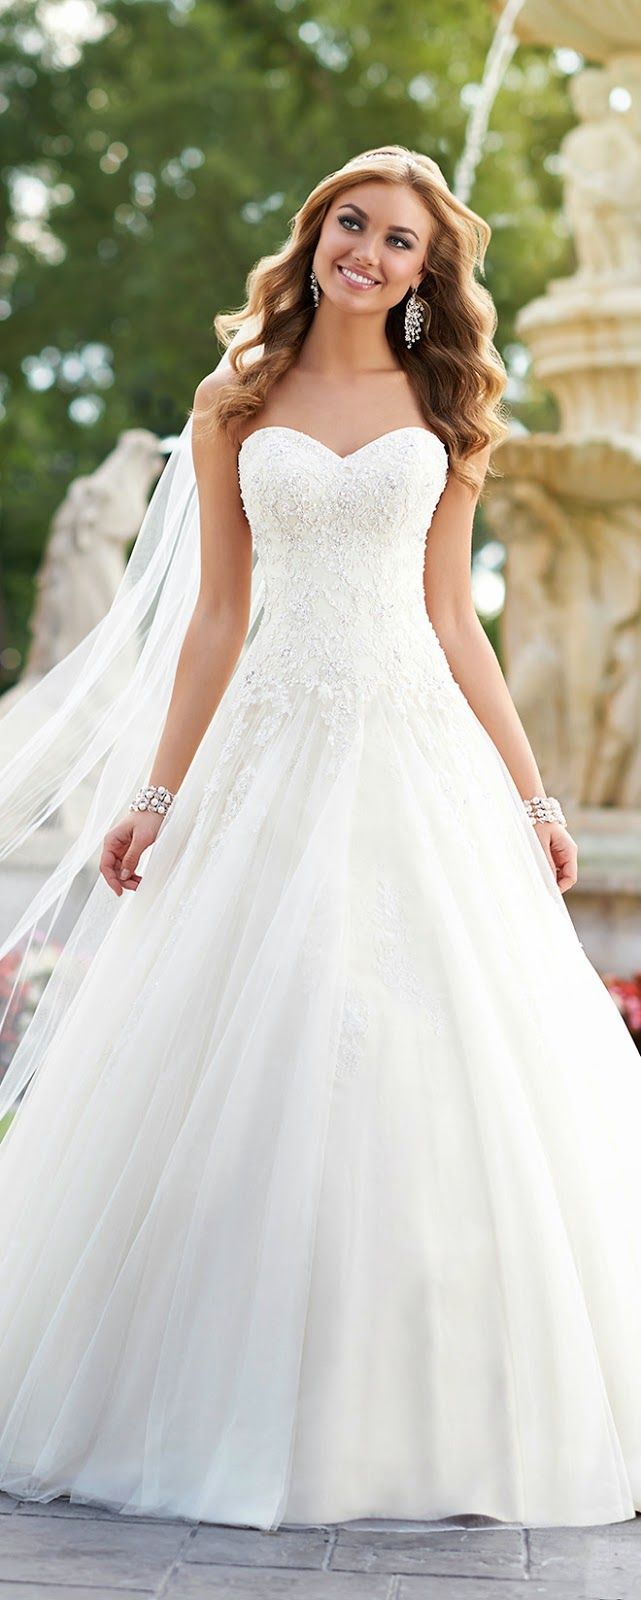 Stella York Fall 2015 Bridal Collection : Special Preview – Belle the Magazine . The Wedding Blog For The Sophisticated Bride